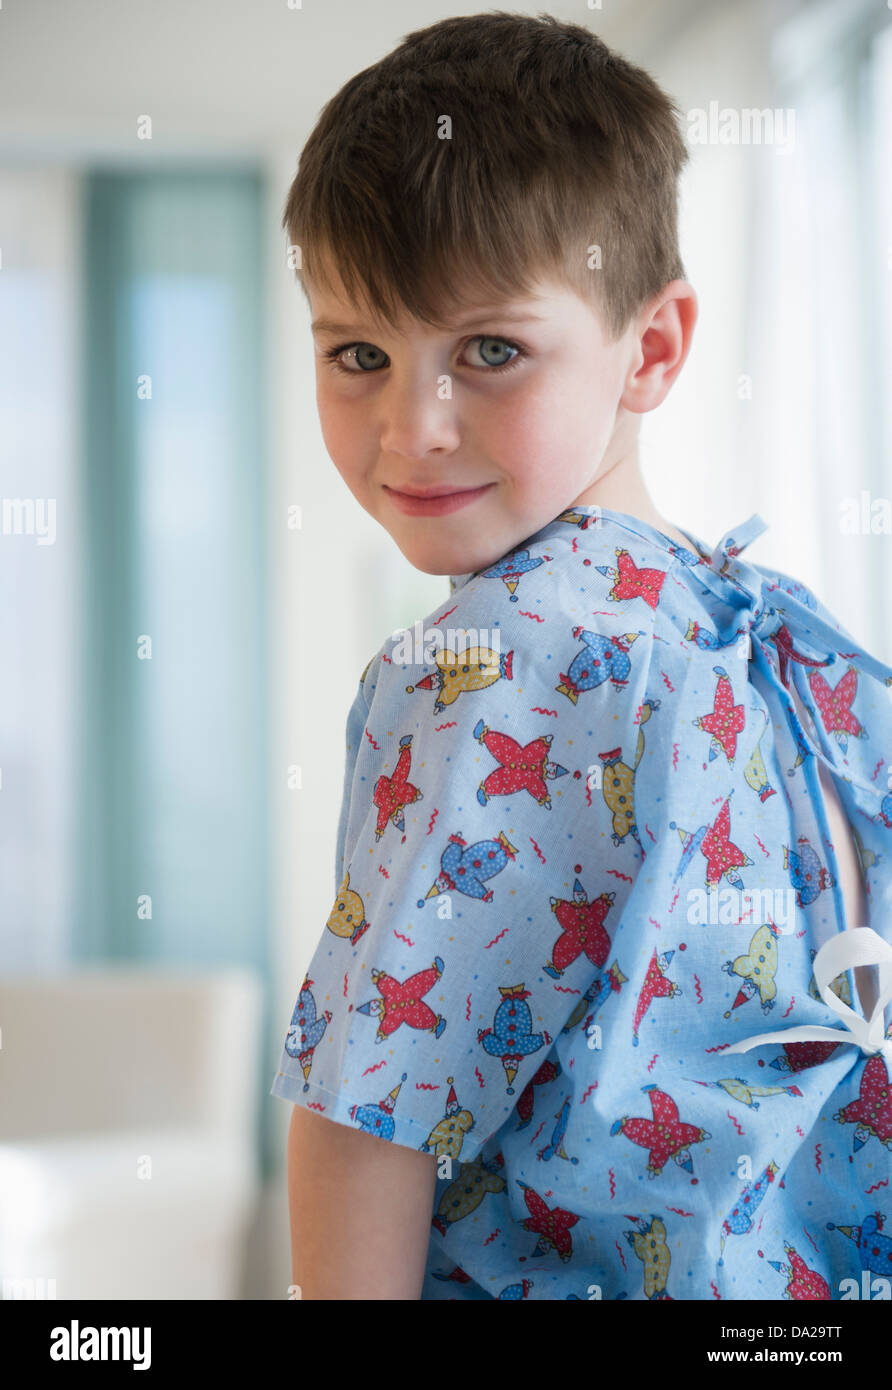 Portrait of boy (4-5) in surgical gown Stock Photo